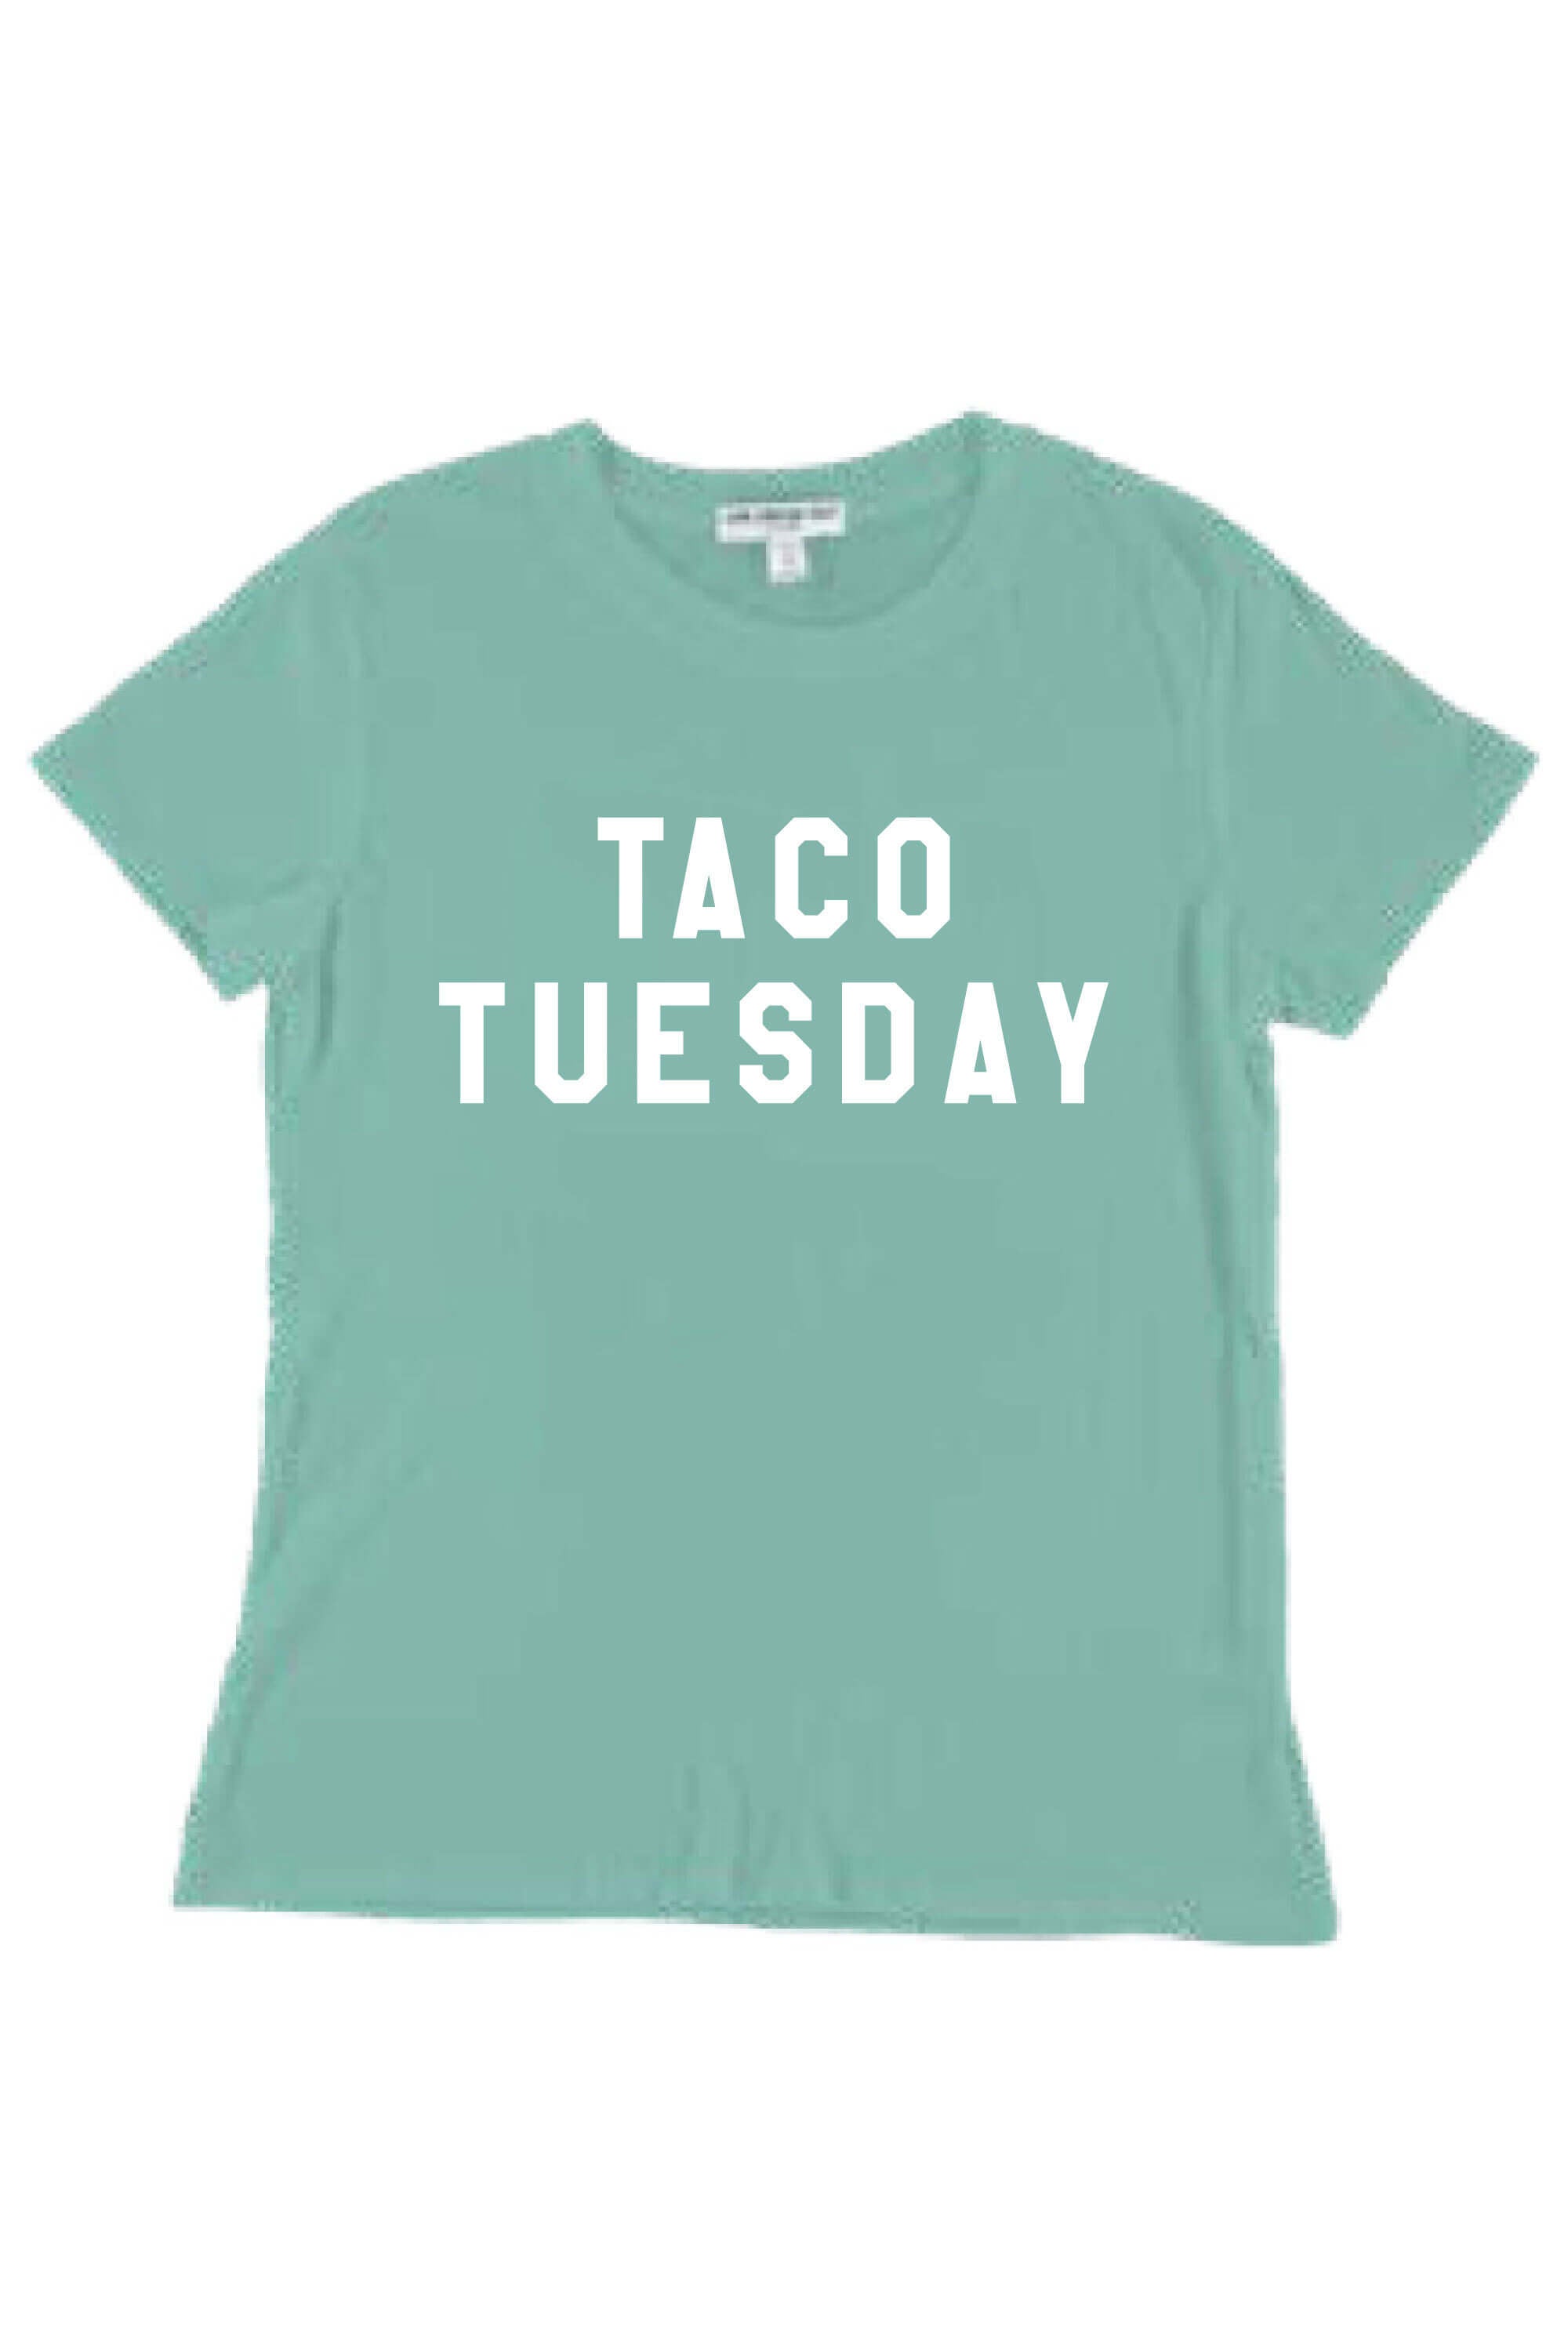 TACO TUESDAY YOUTH SIZE LOOSE TEE